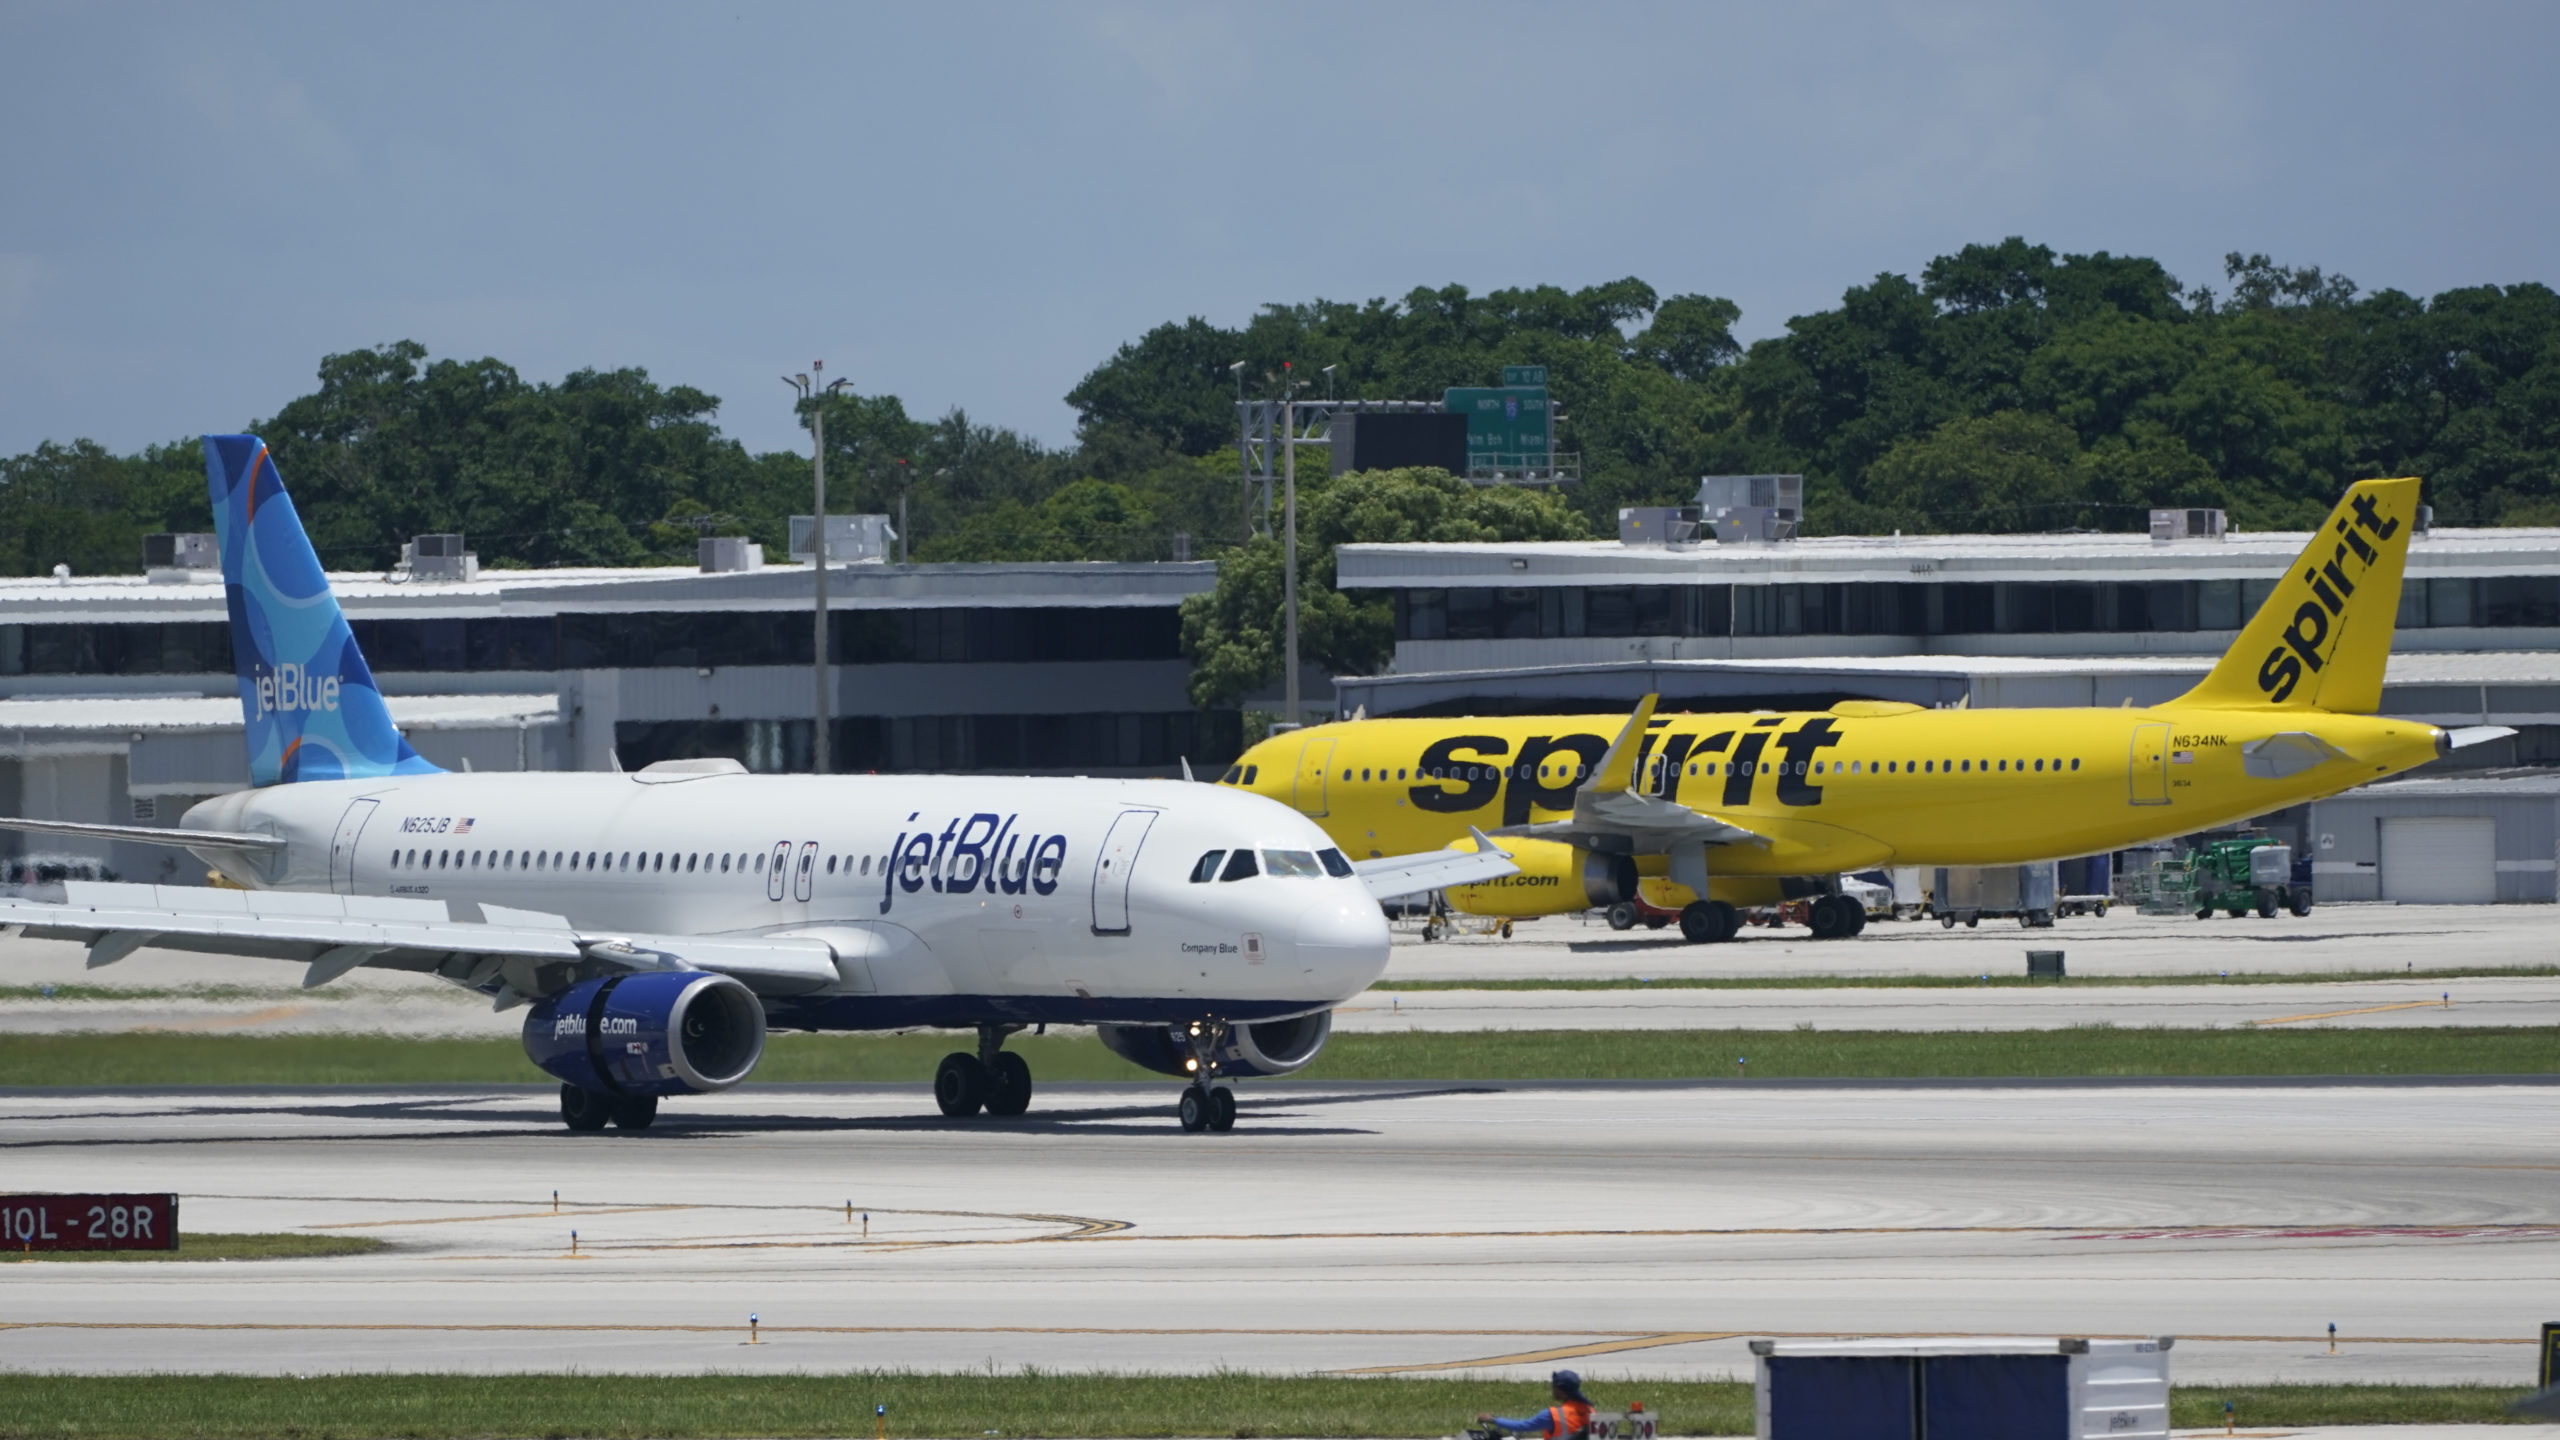 JetBlue and Spirit airplanes at an airport....